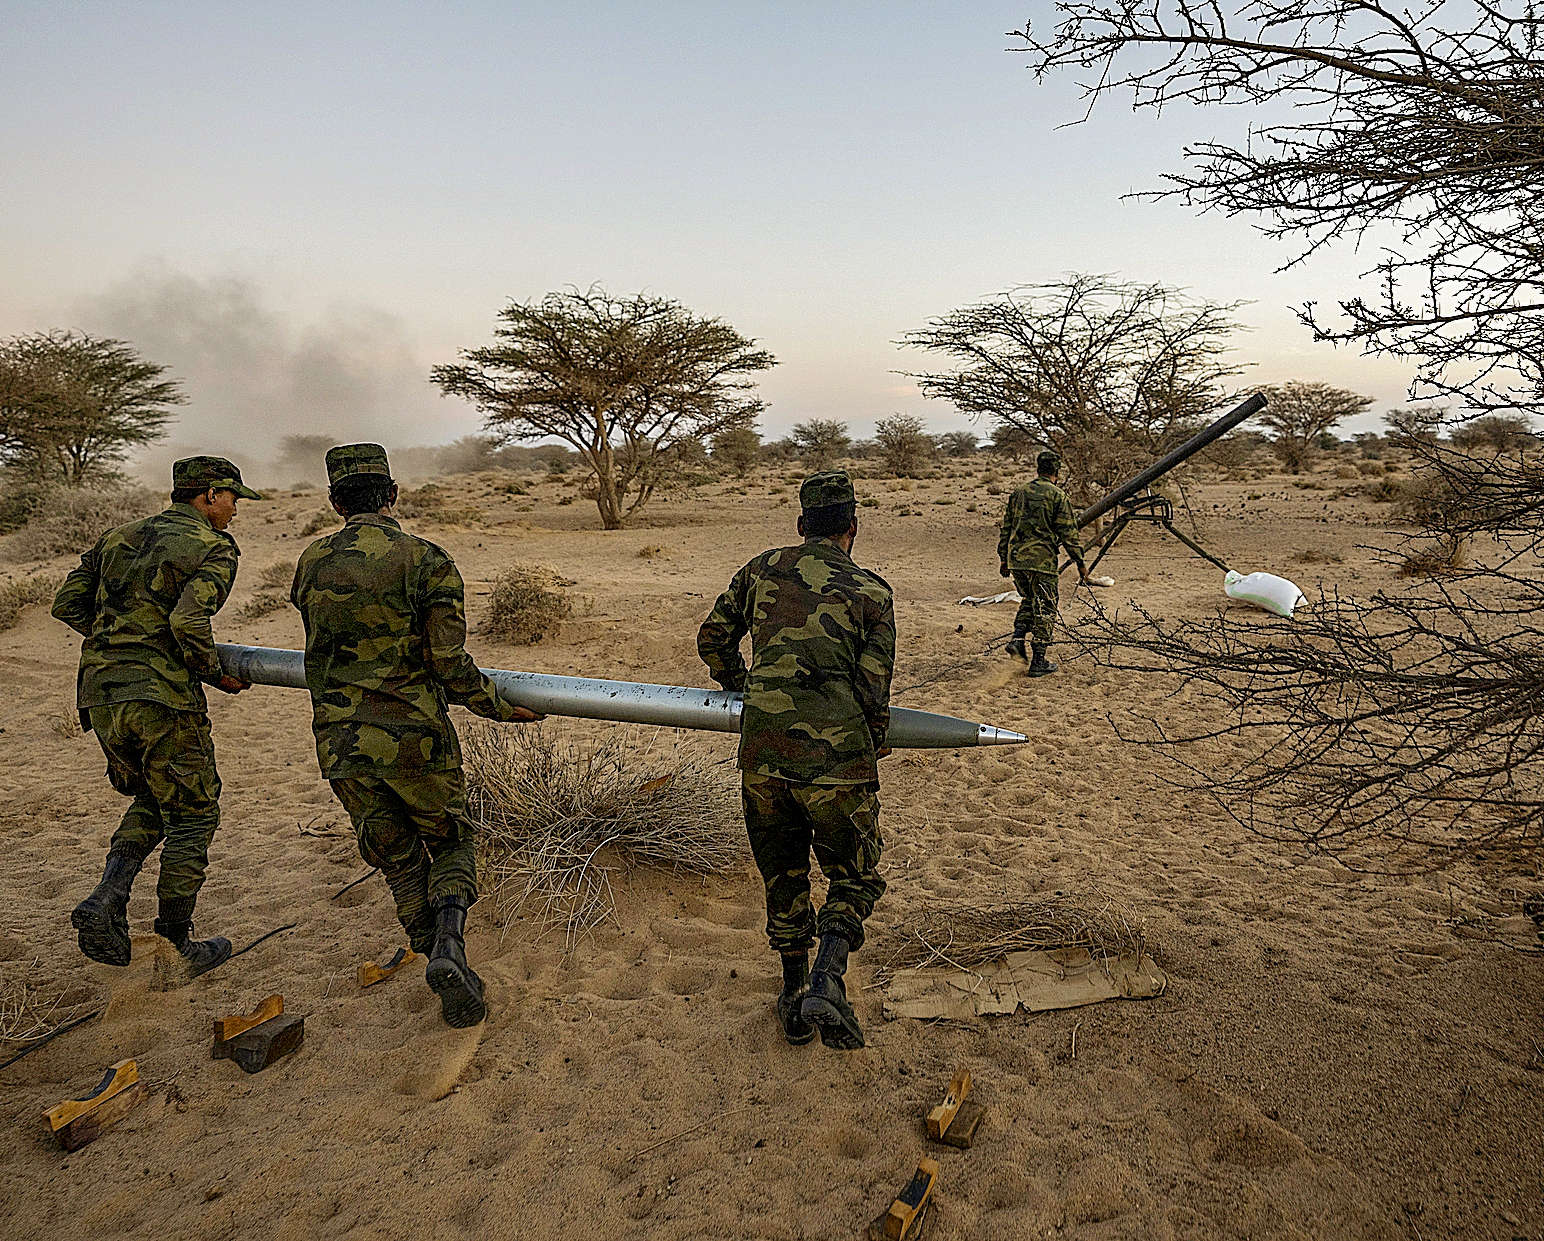 Three Polisario Front soldiers carry a rocket during the attack on Morocco, near Mahares, S